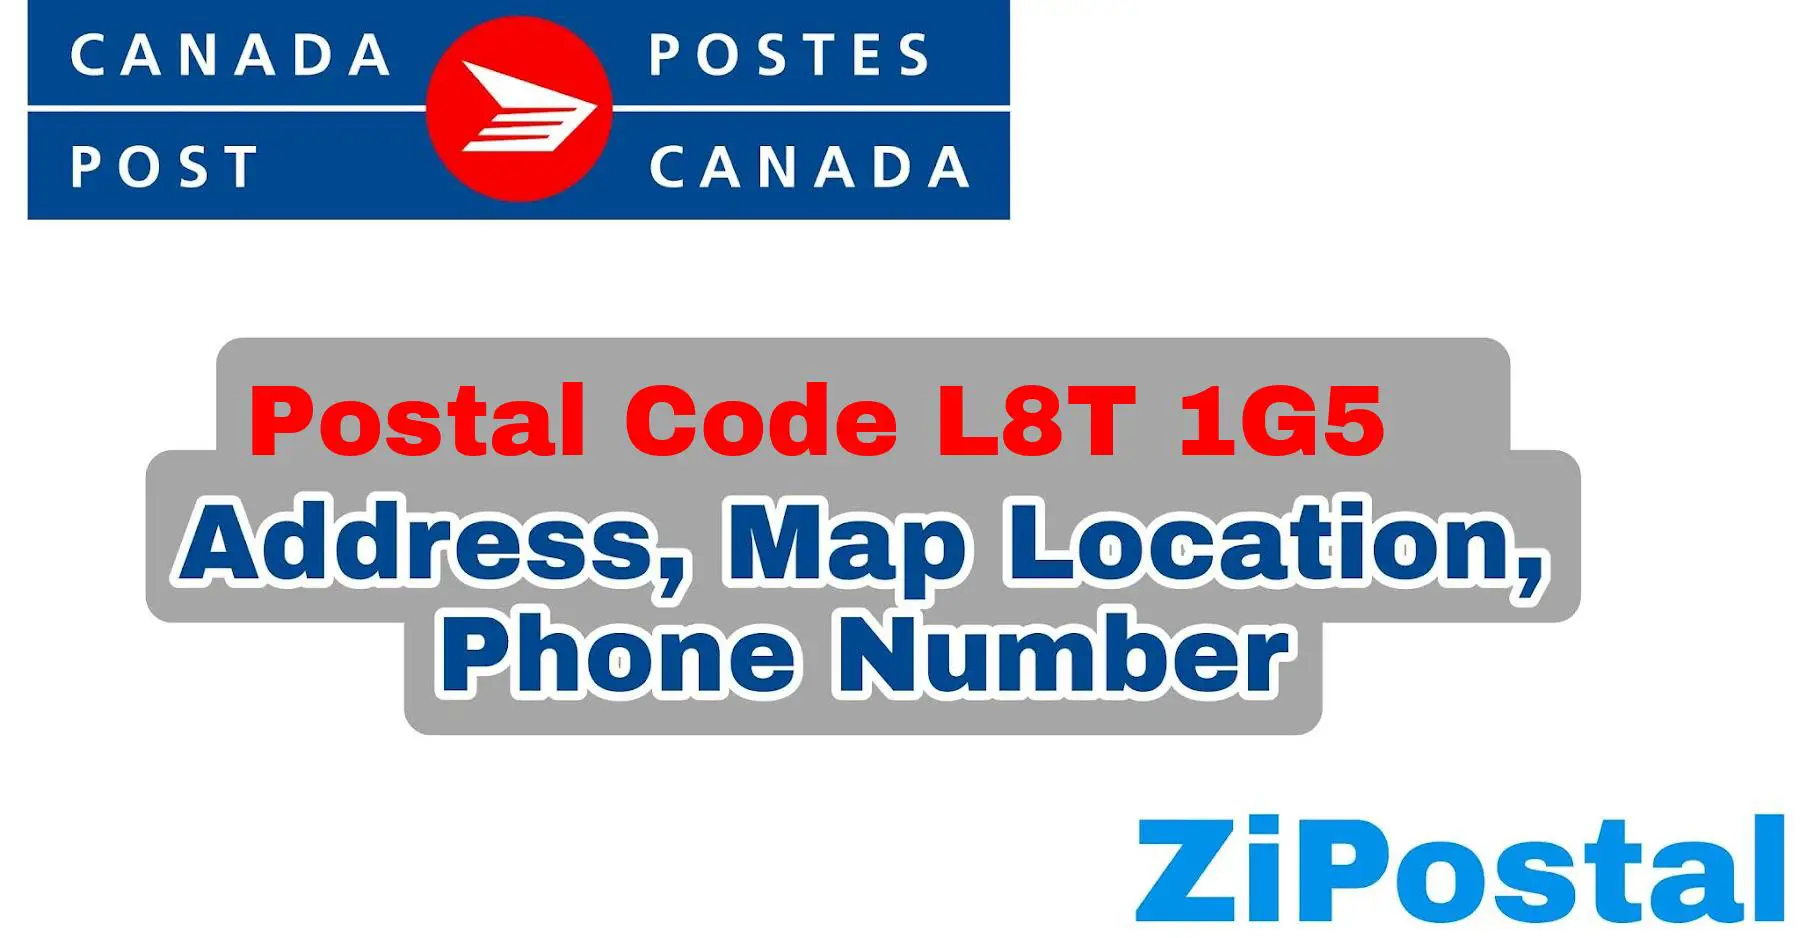 Postal Code L8T 1G5 Address Map Location and Phone Number